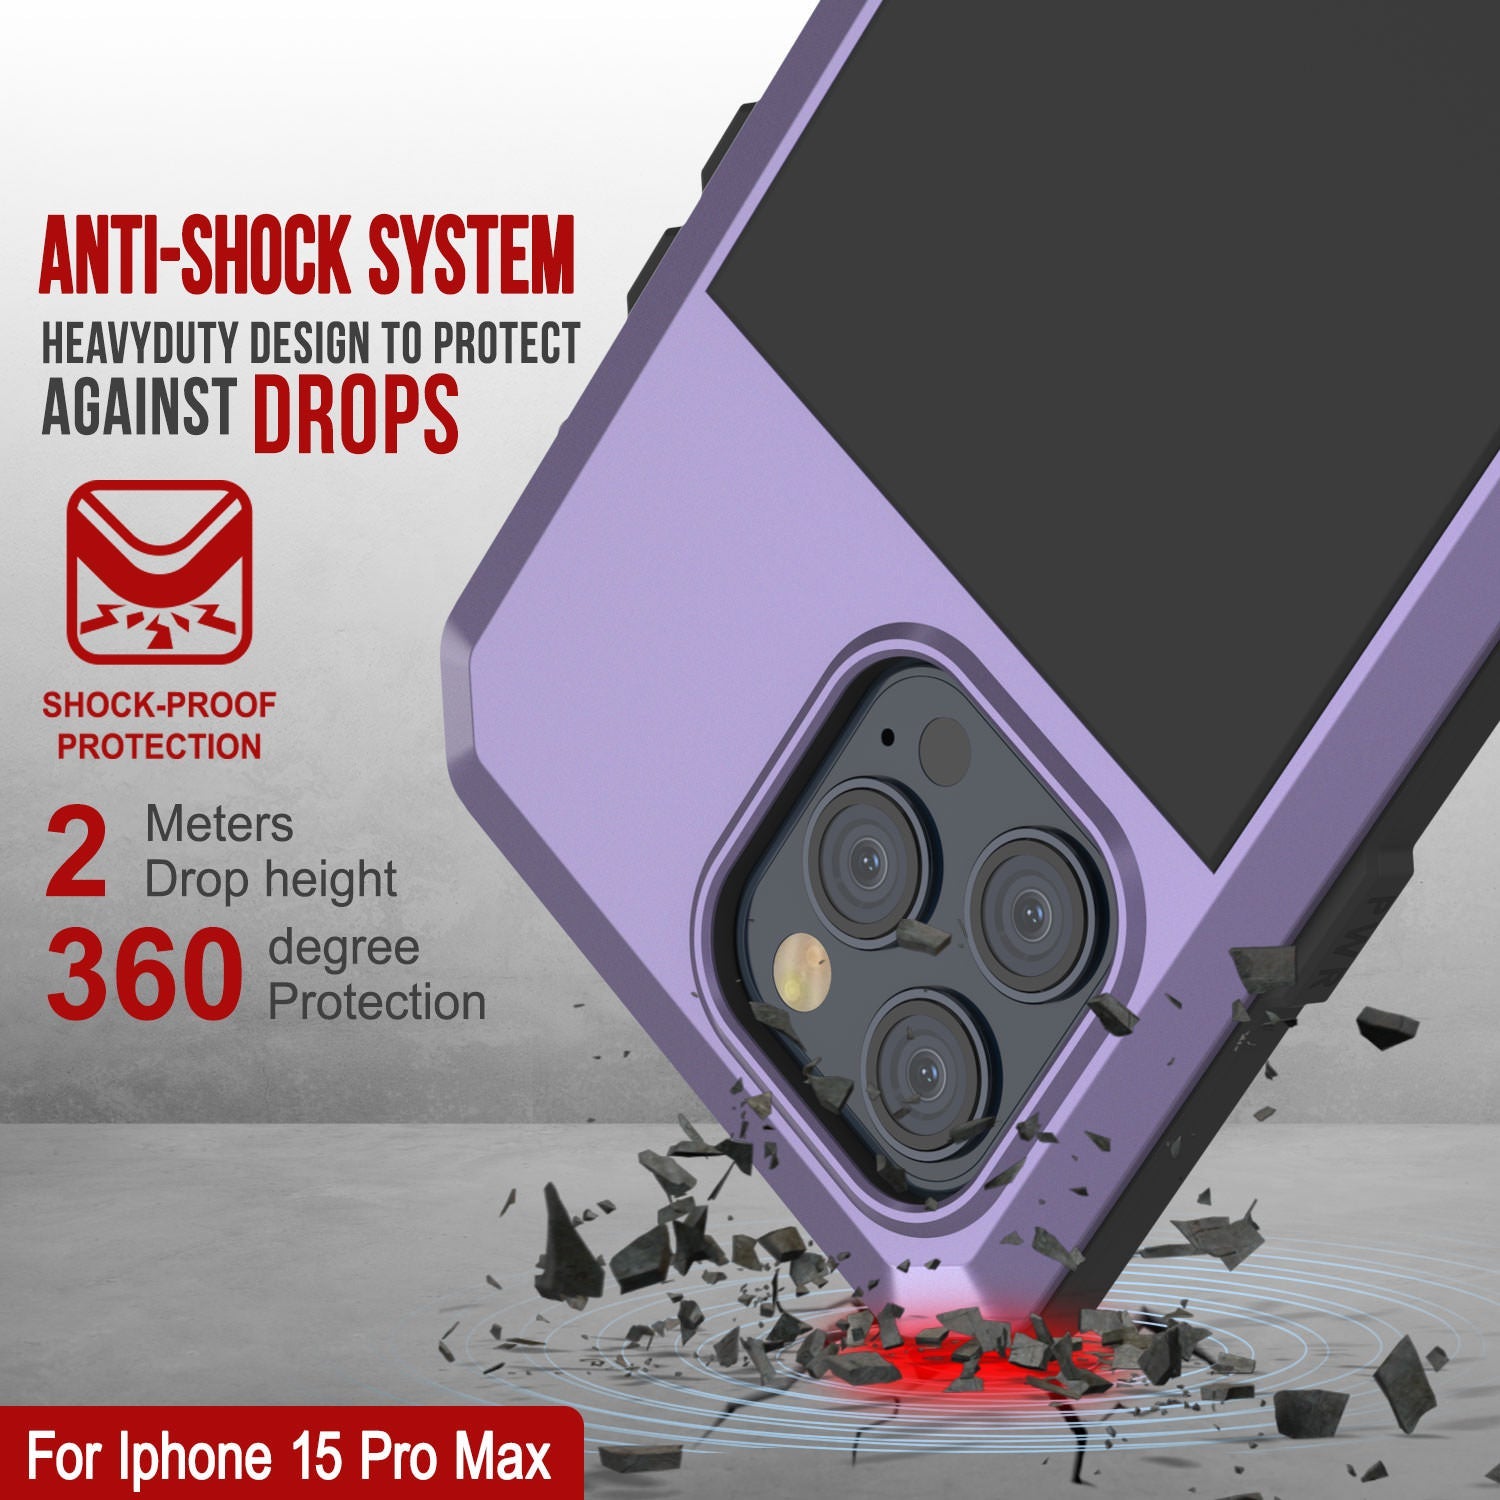 iPhone 15 Pro Max Metal Case, Heavy Duty Military Grade Armor Cover [shock proof] Full Body Hard [Purple]